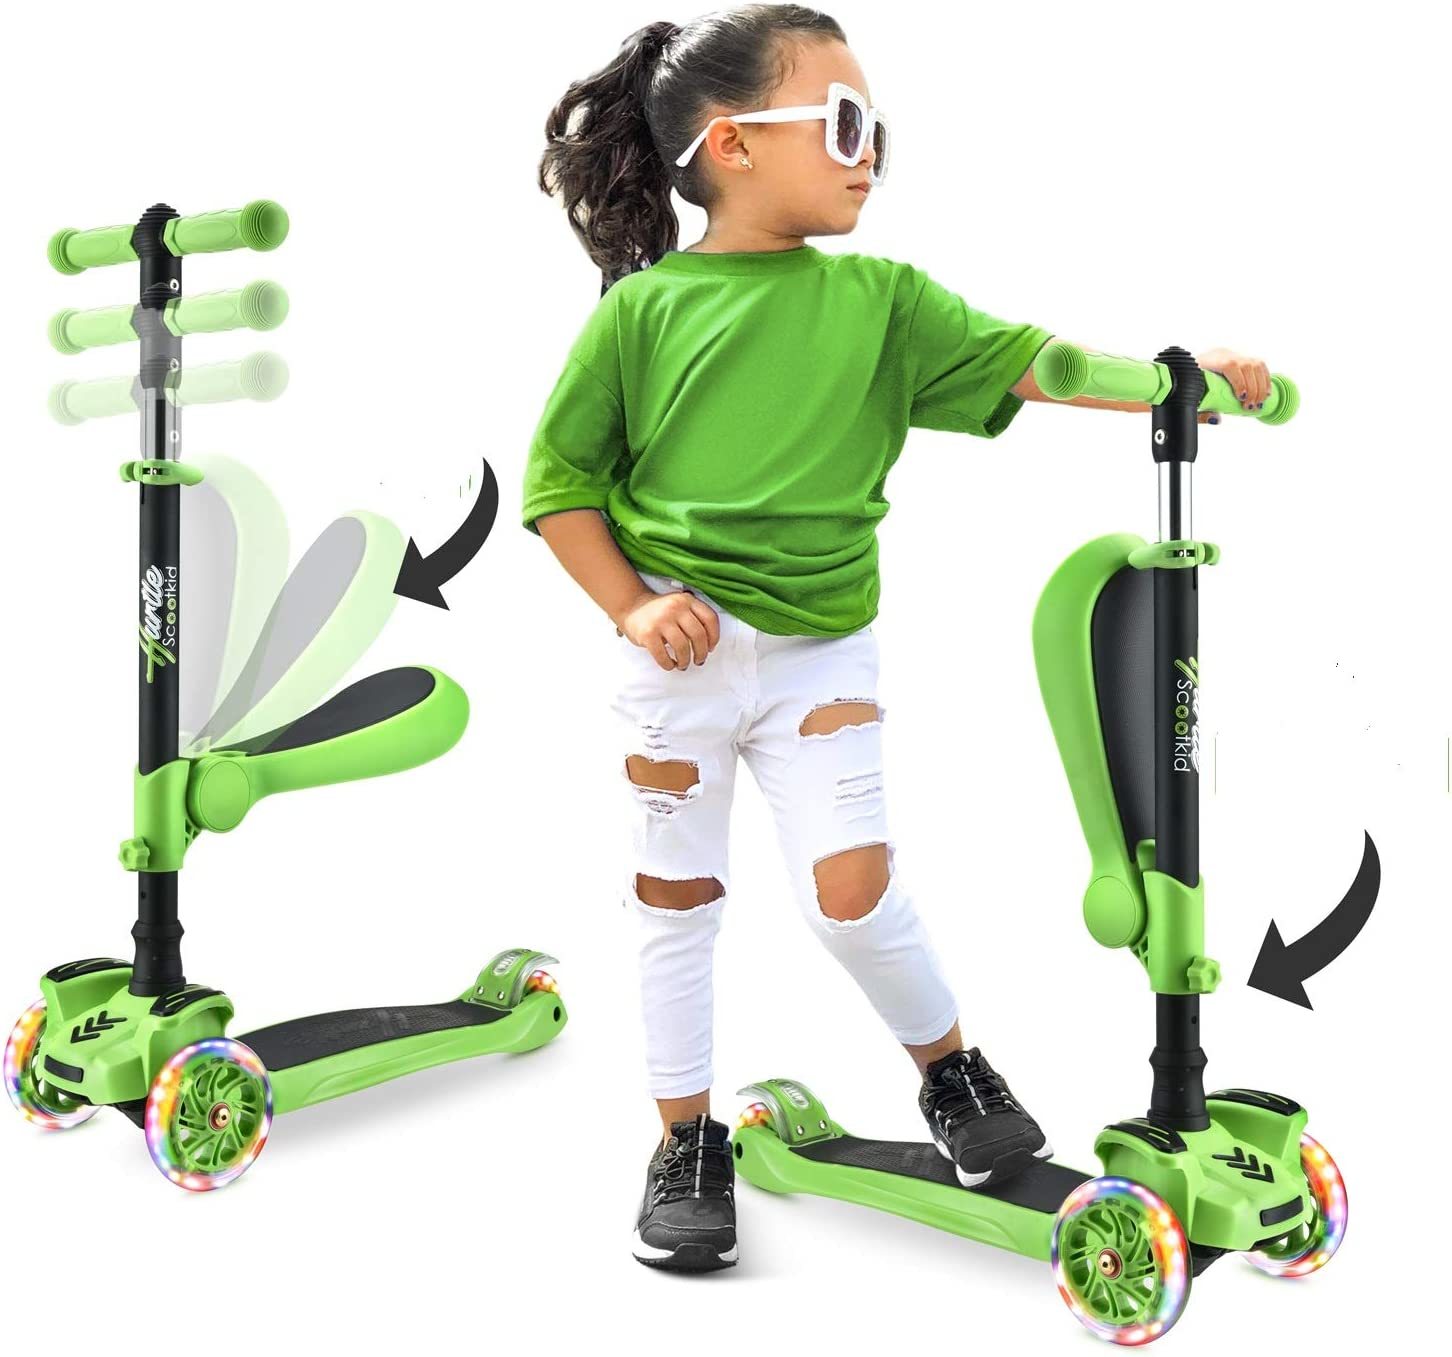 Hurtle Hurfs56 Offers The 3 Wheeled Scooter For Kids - Stand And Cruise - $51.96